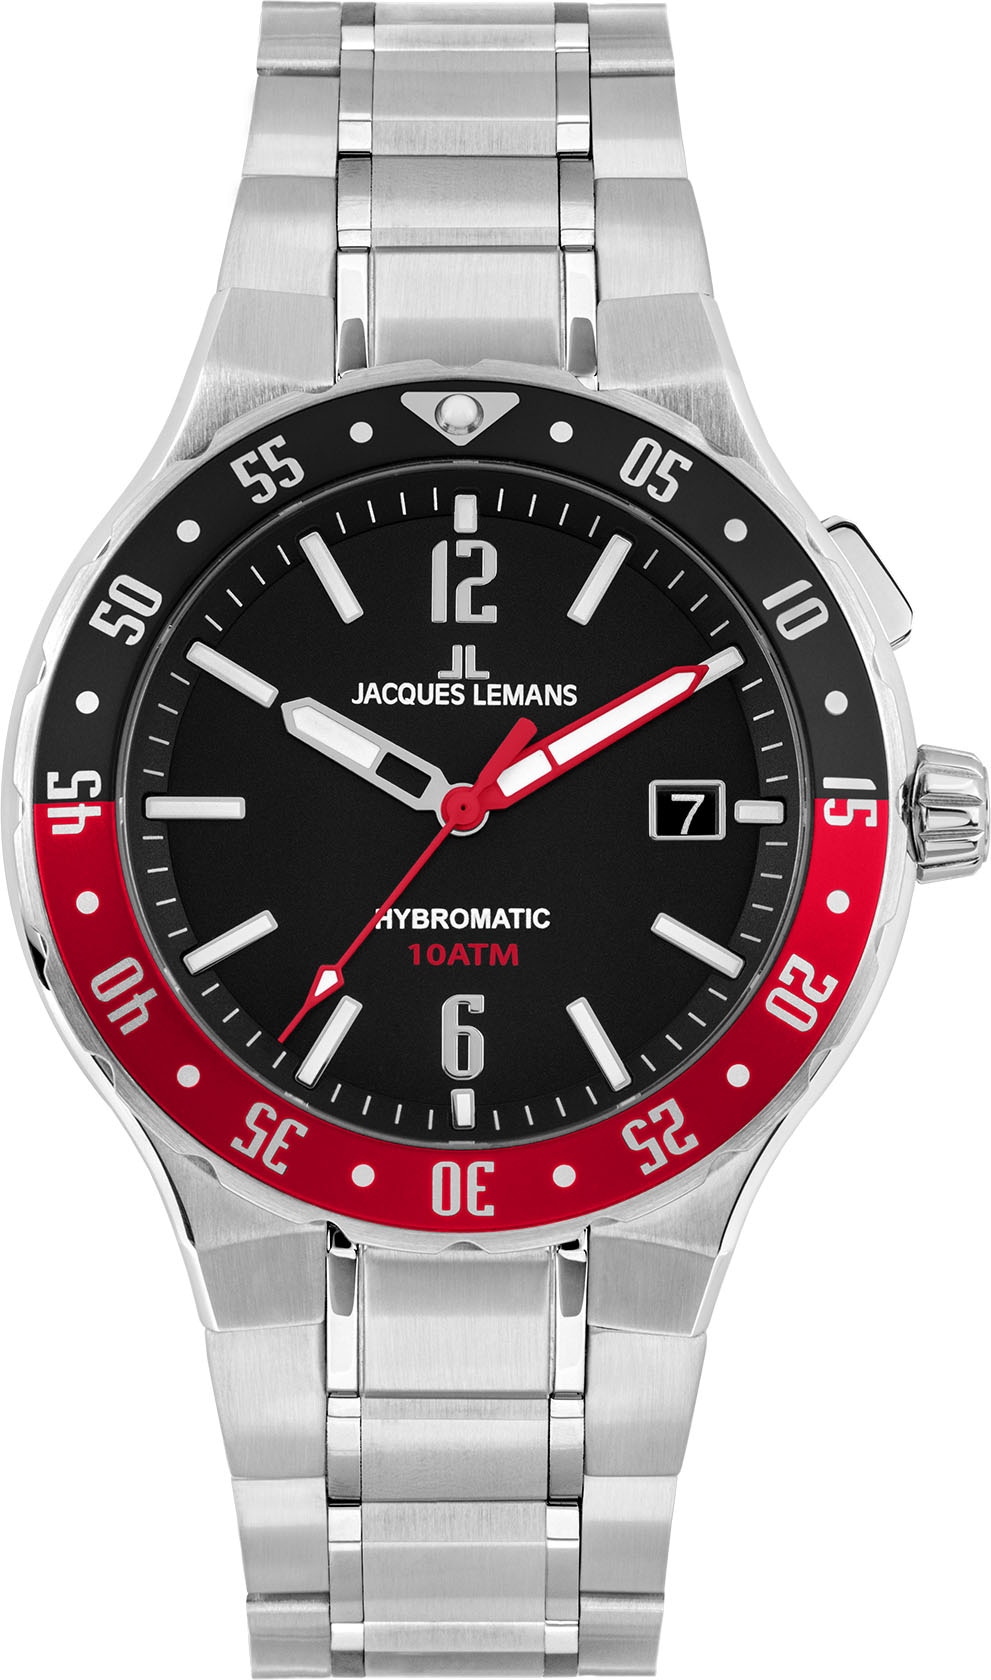 Jacques Lemans Kineticuhr »Hybromatic, 1-2109F« bei ♕